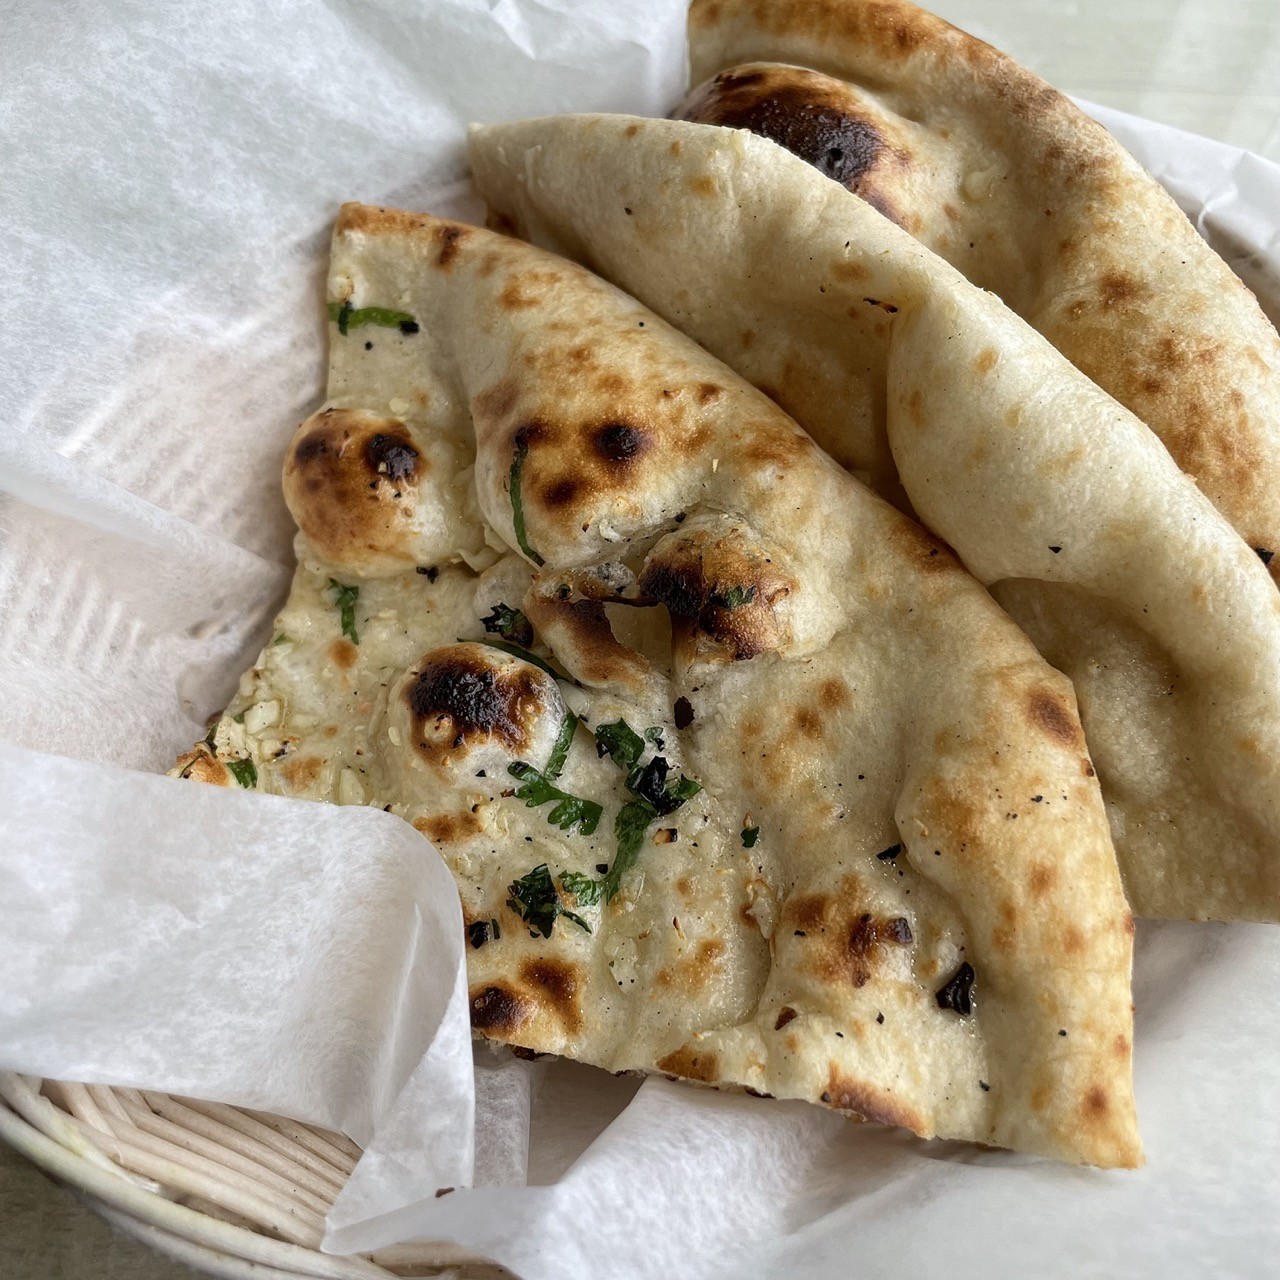 Garlic naan at Sankalp is exceptionally well made, chewy yet light, loaded with garlic and baked in the tandoor.